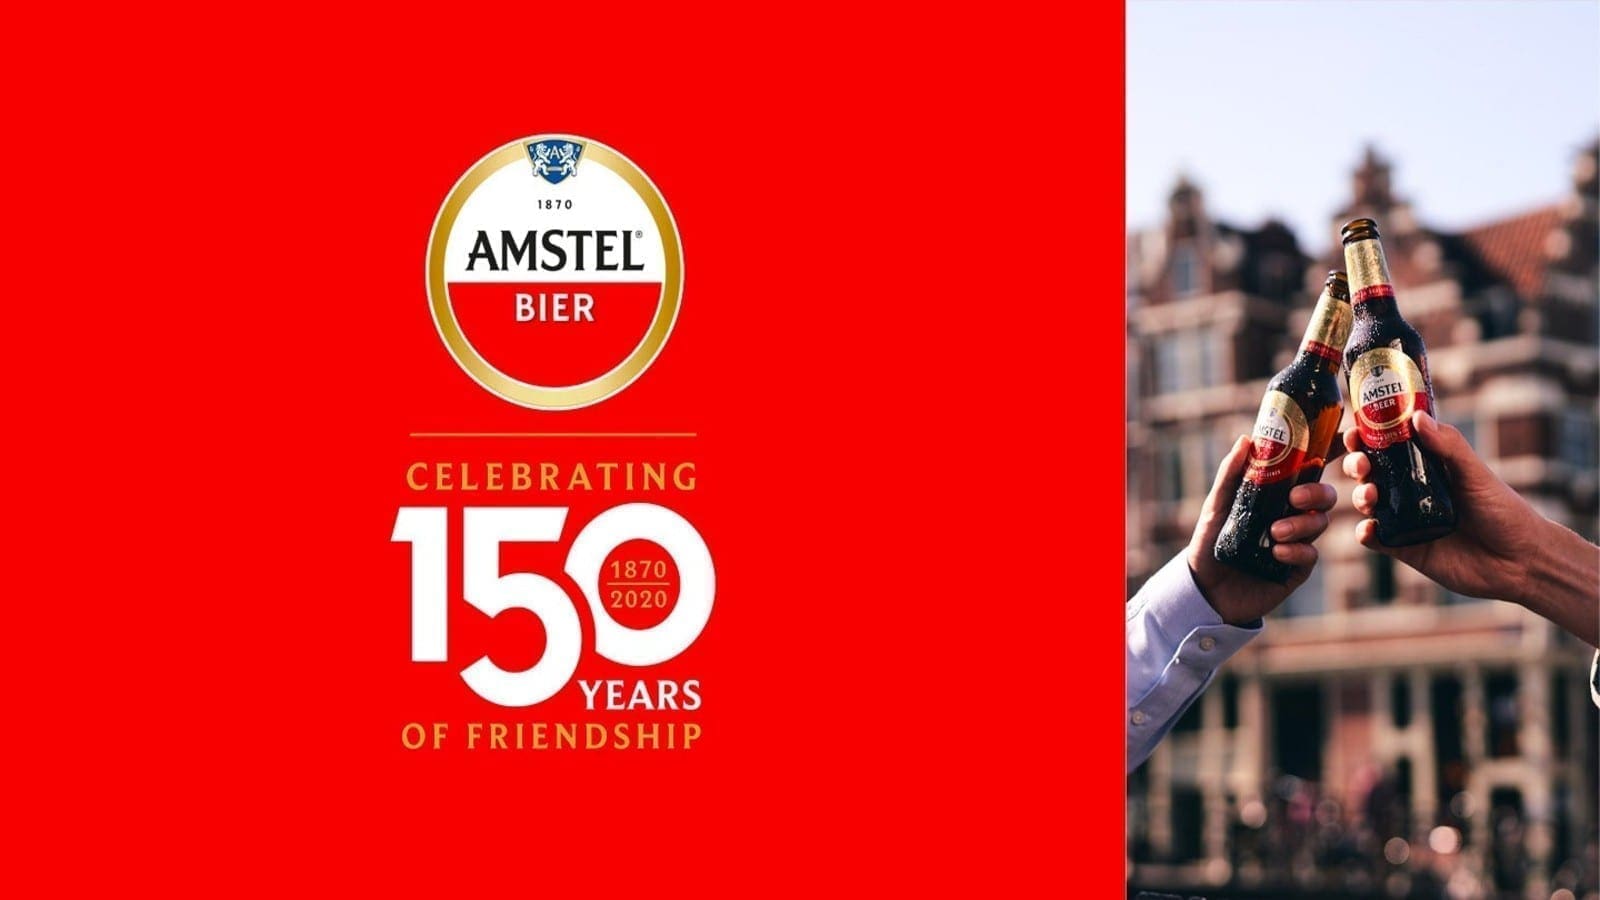 Amstel celebrates 150-year anniversary with expansion to China